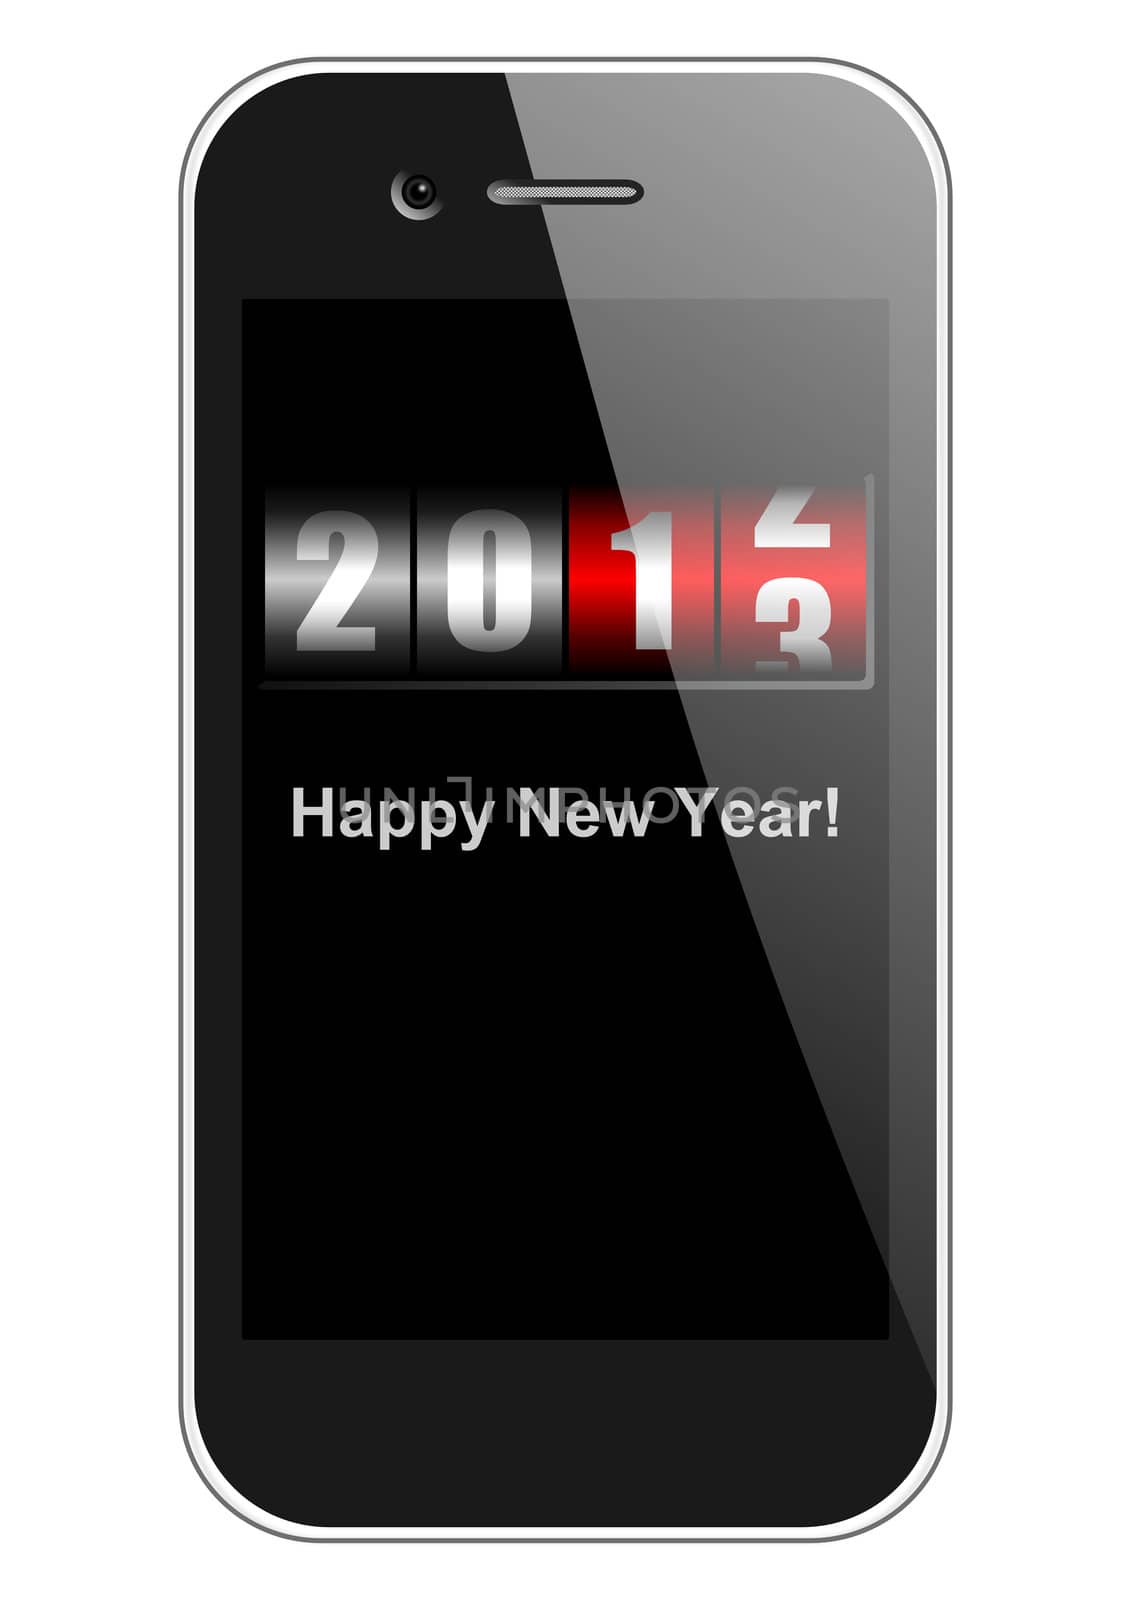 2013 new years illustration with mobile phone and counter by alexwhite